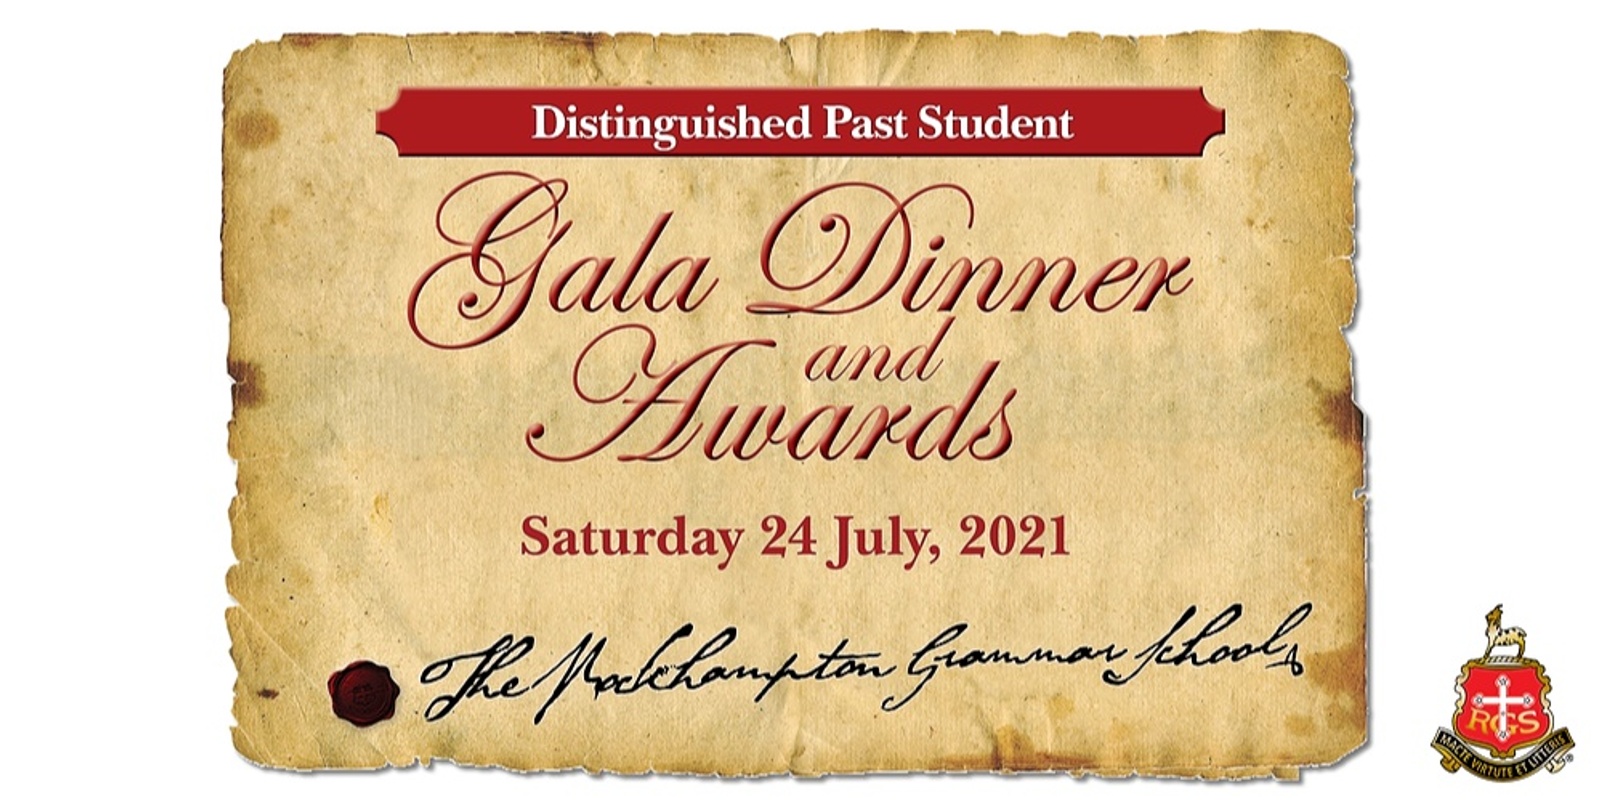 Banner image for RGS Distinguished Past Students' Awards